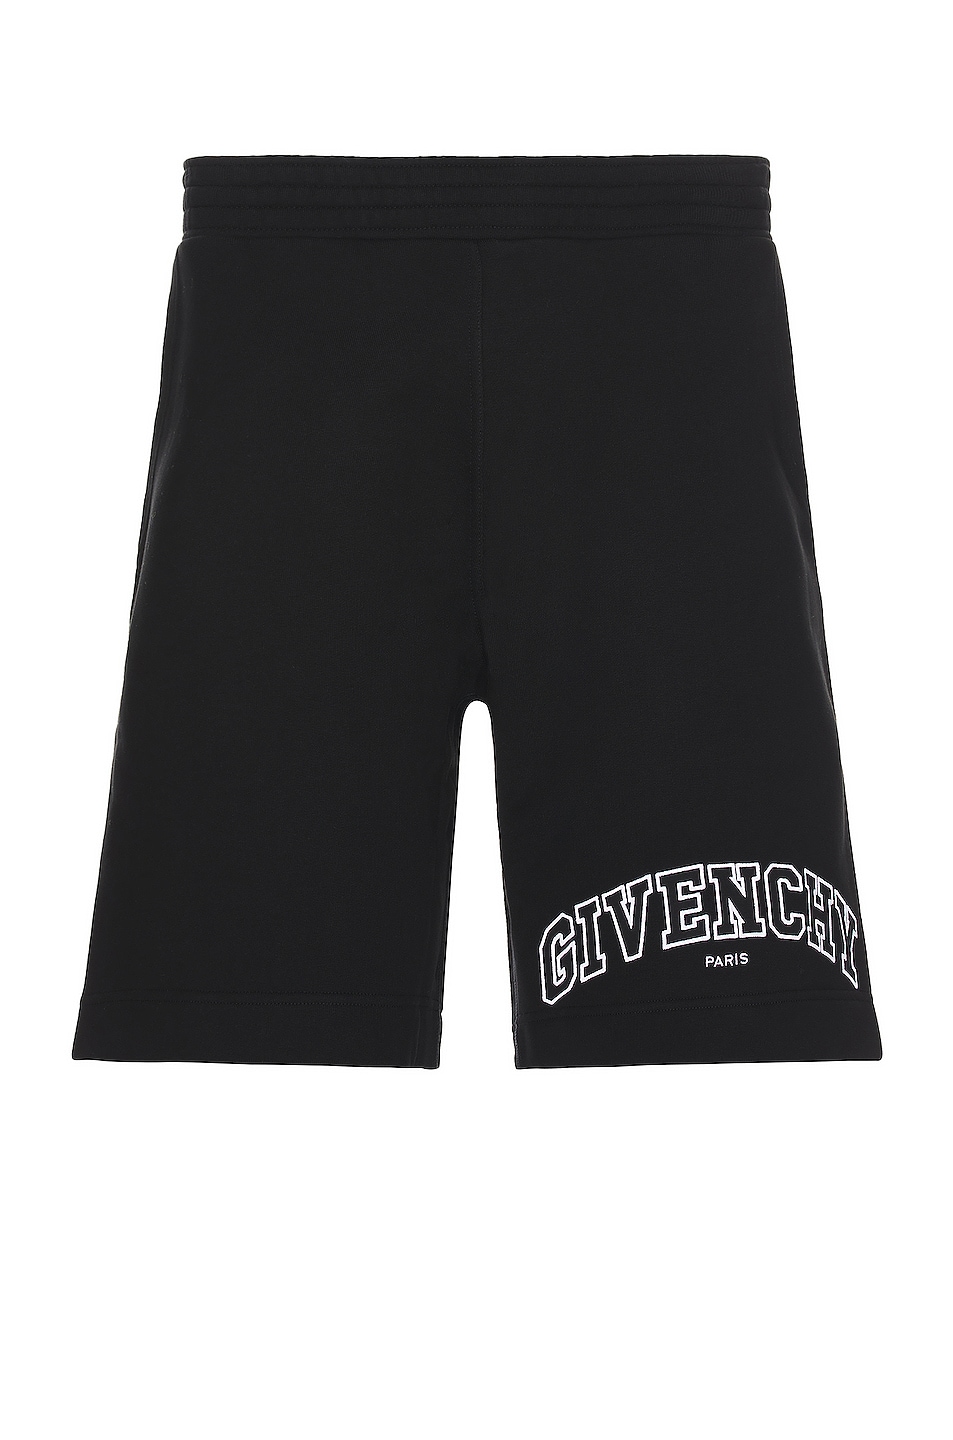 Image 1 of Givenchy Boxy Fit Embroidery Shorts in Black